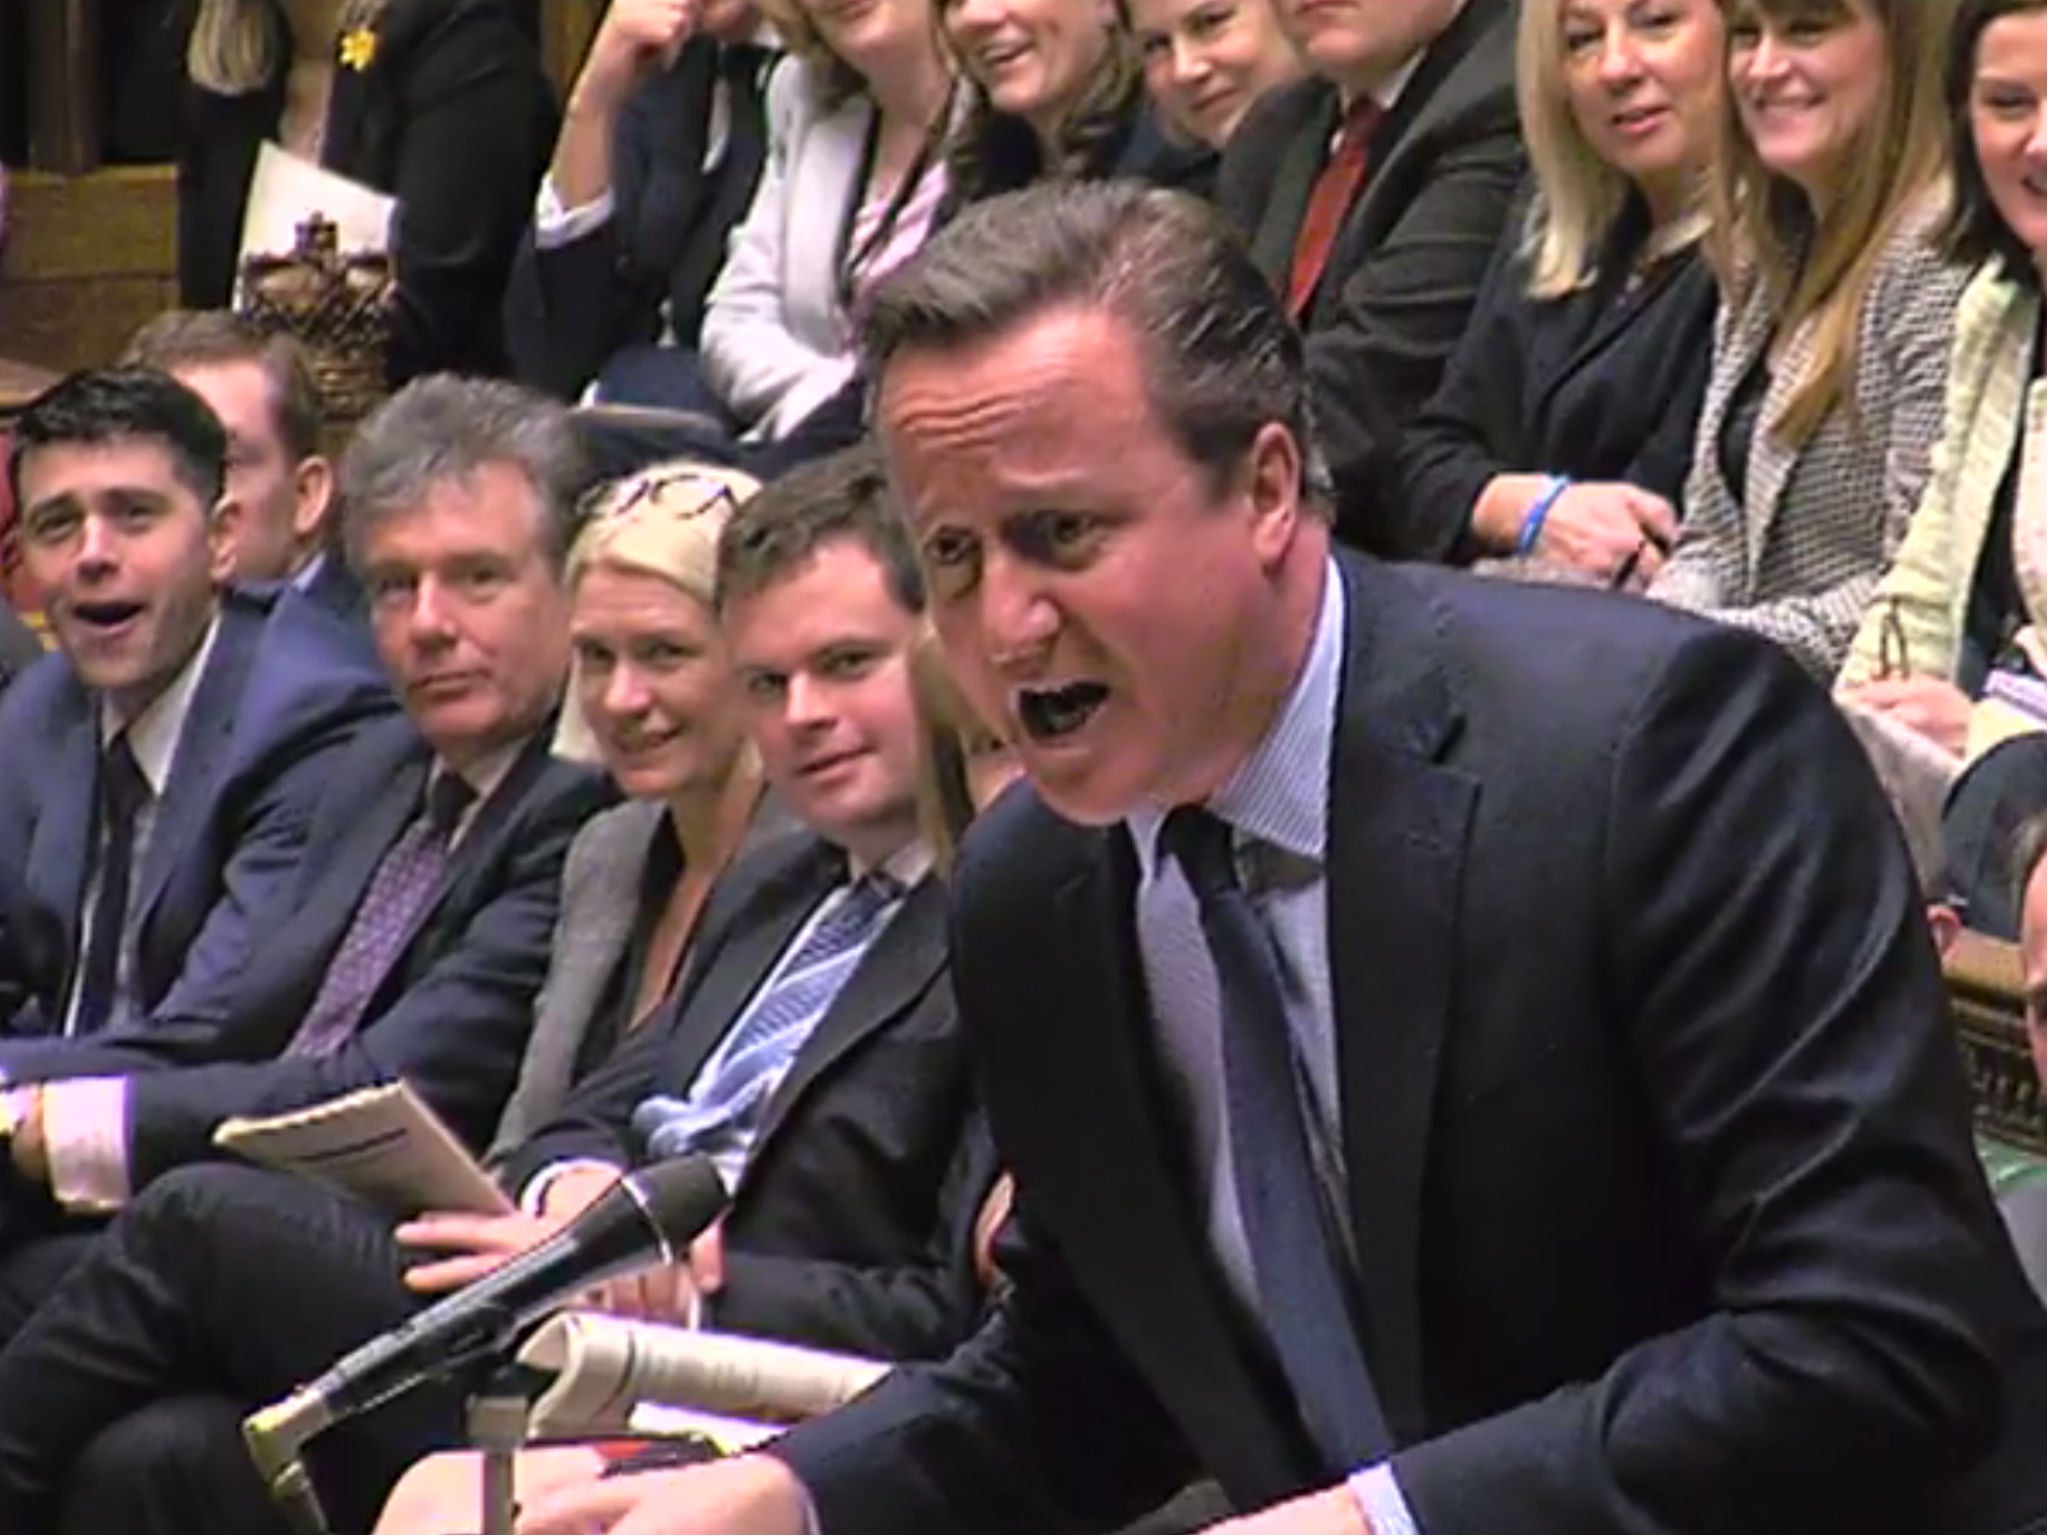 David Cameron attacks Jeremy Corbyn about his clothes during PMQs on 24 Feb 2016